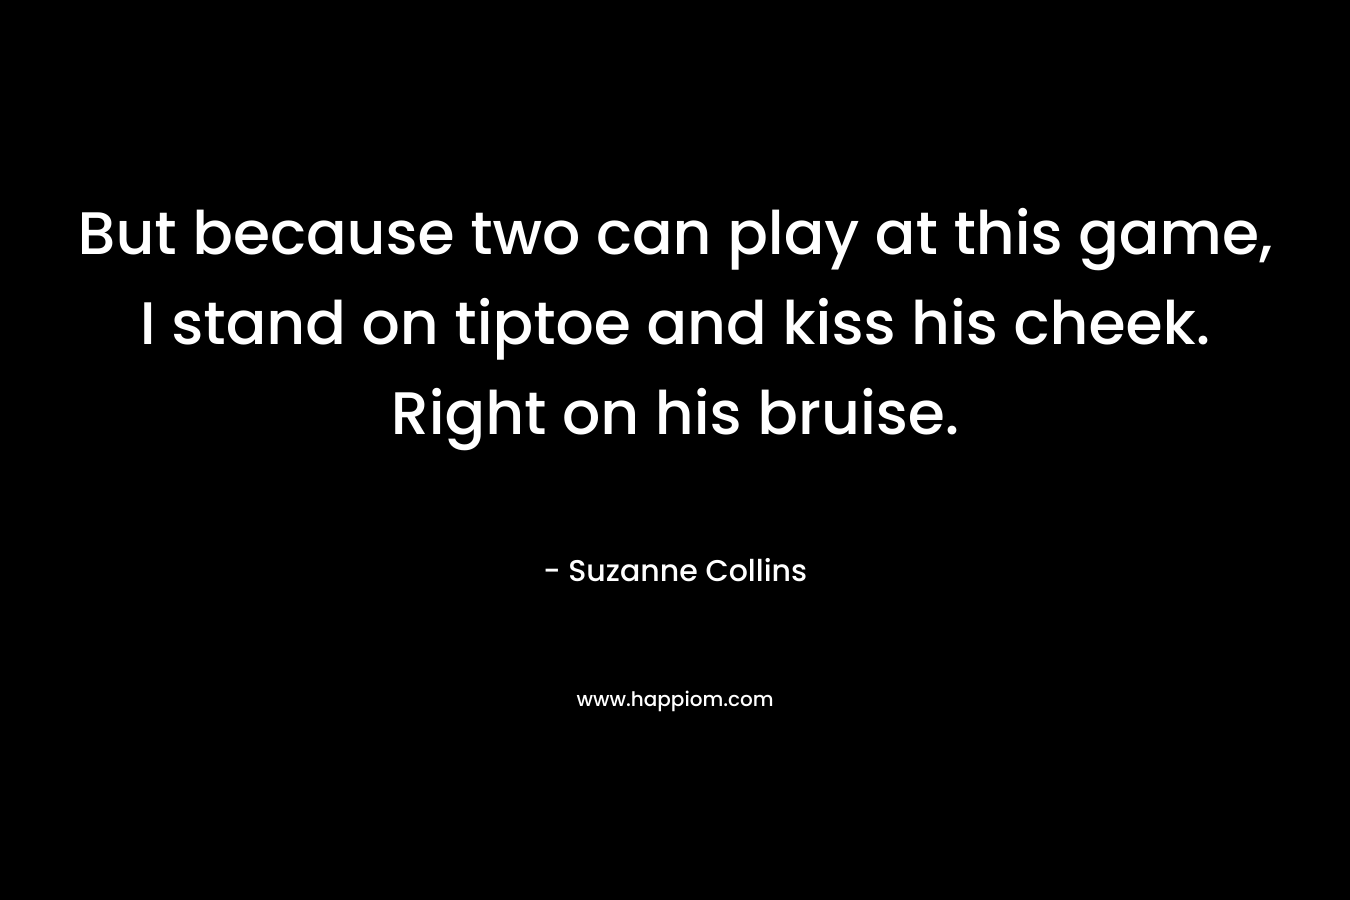 But because two can play at this game, I stand on tiptoe and kiss his cheek. Right on his bruise. 